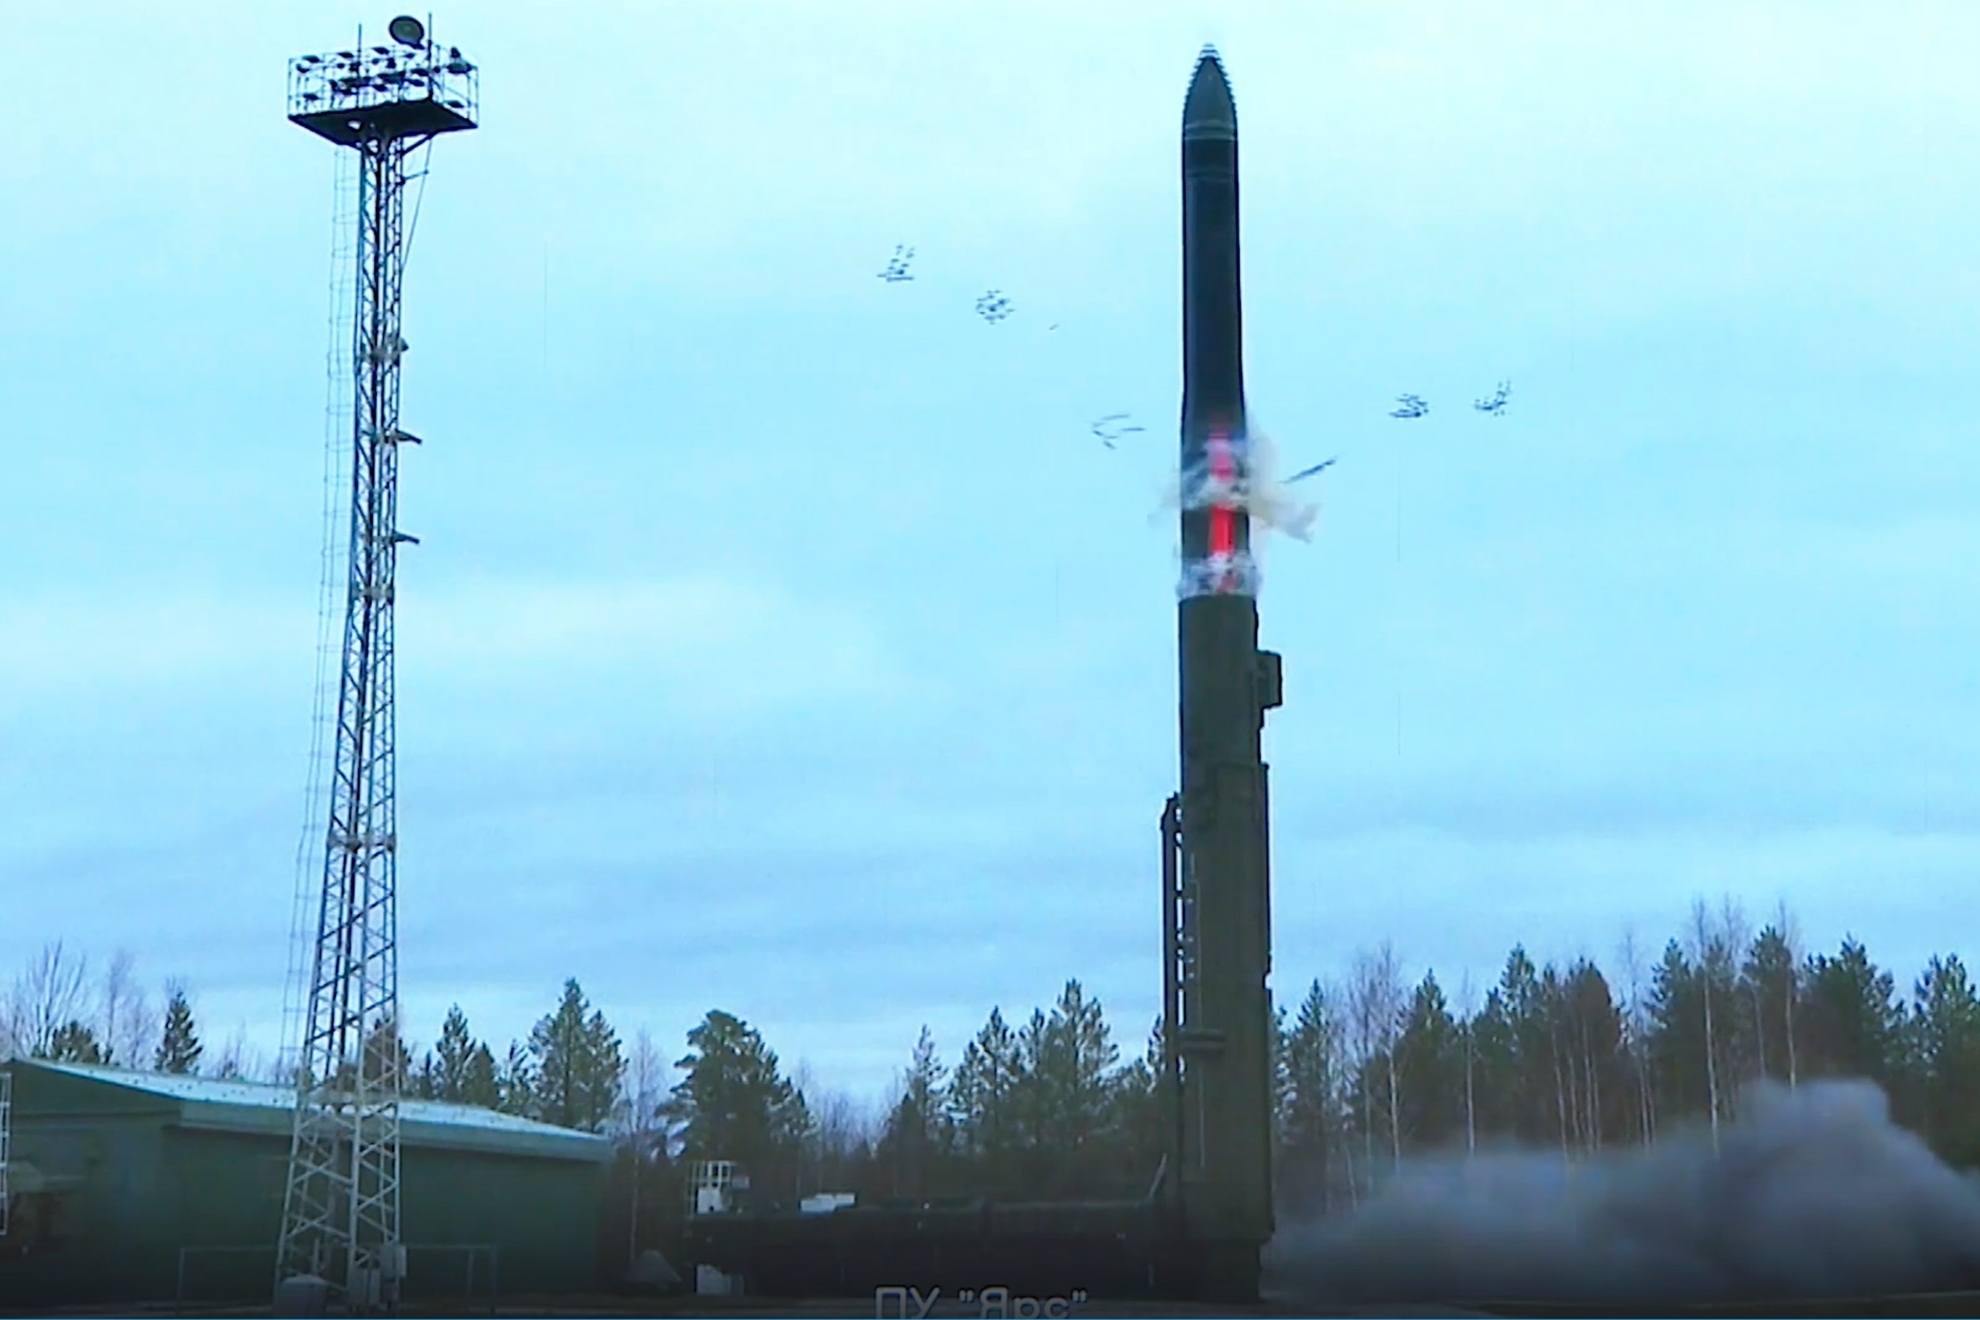 Russian nuclear missile taking off